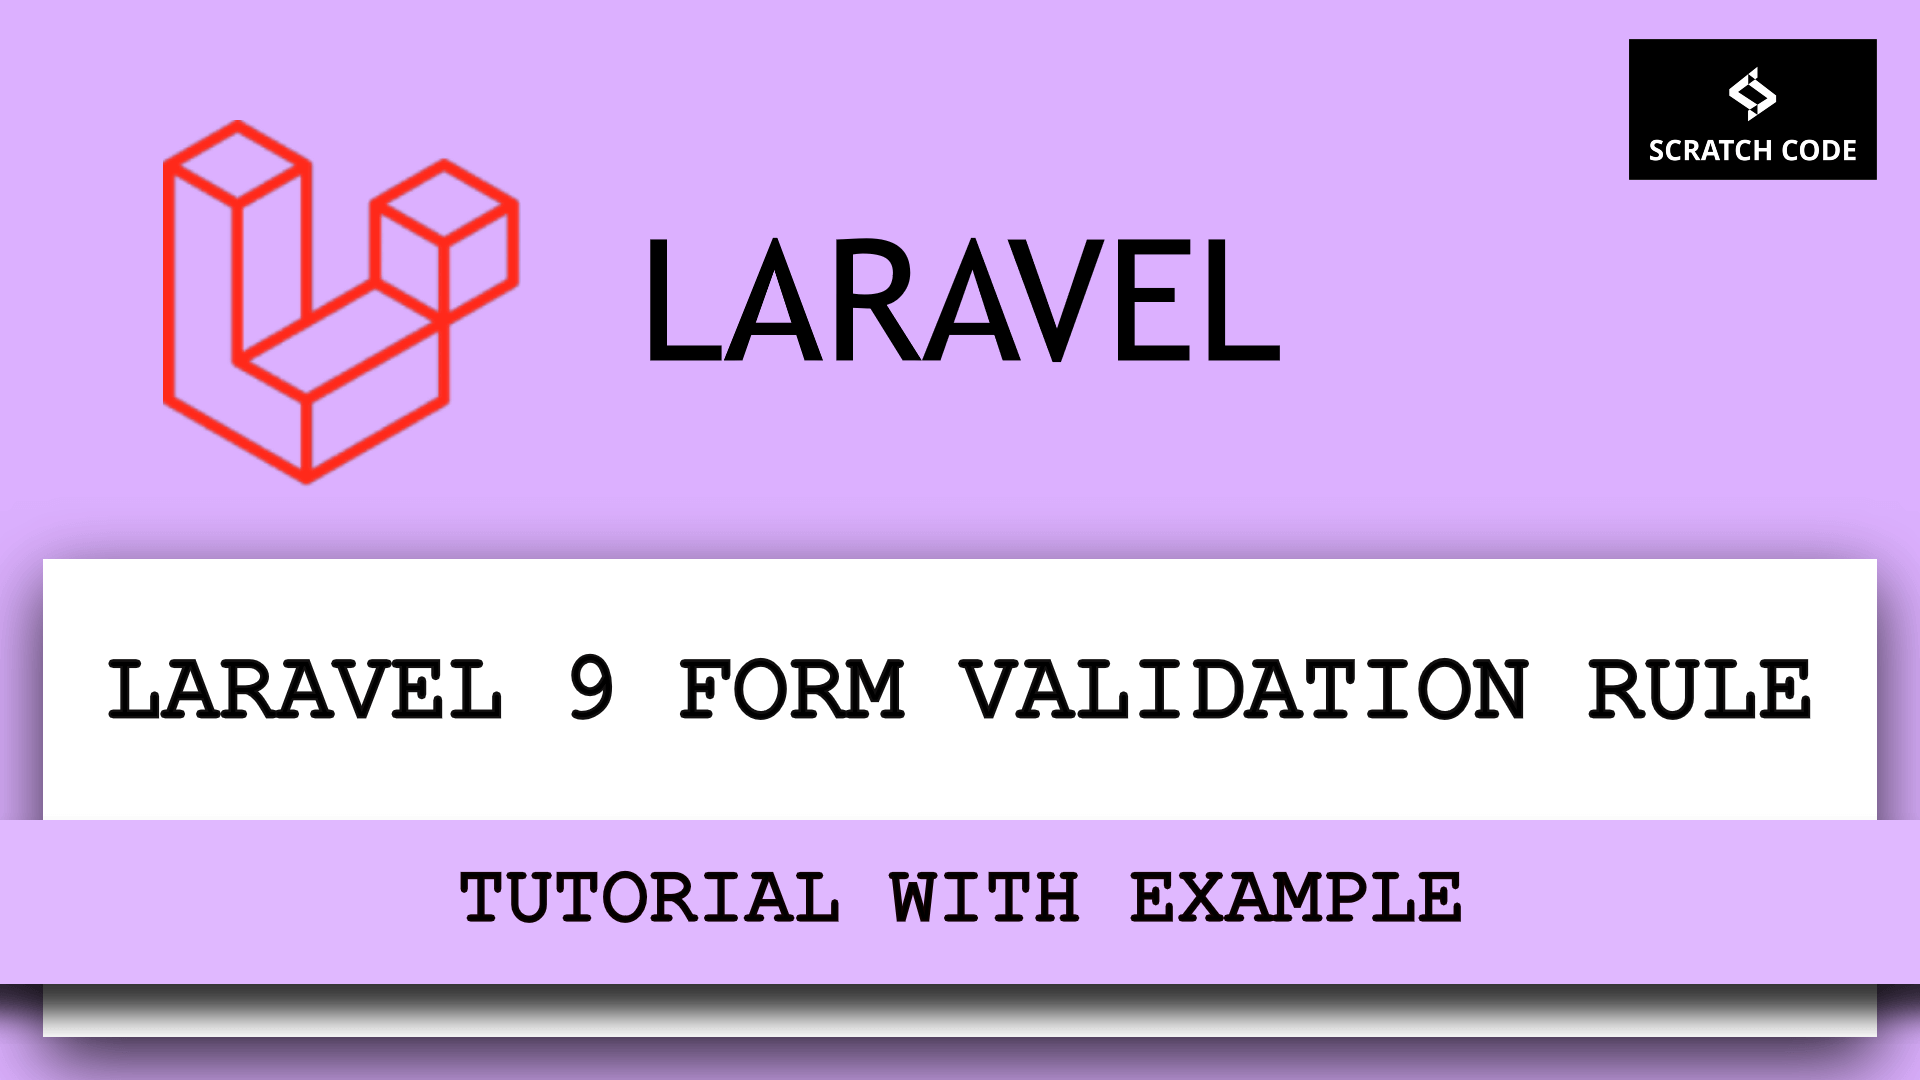 Laravel 9 validation form rule tutorial with example